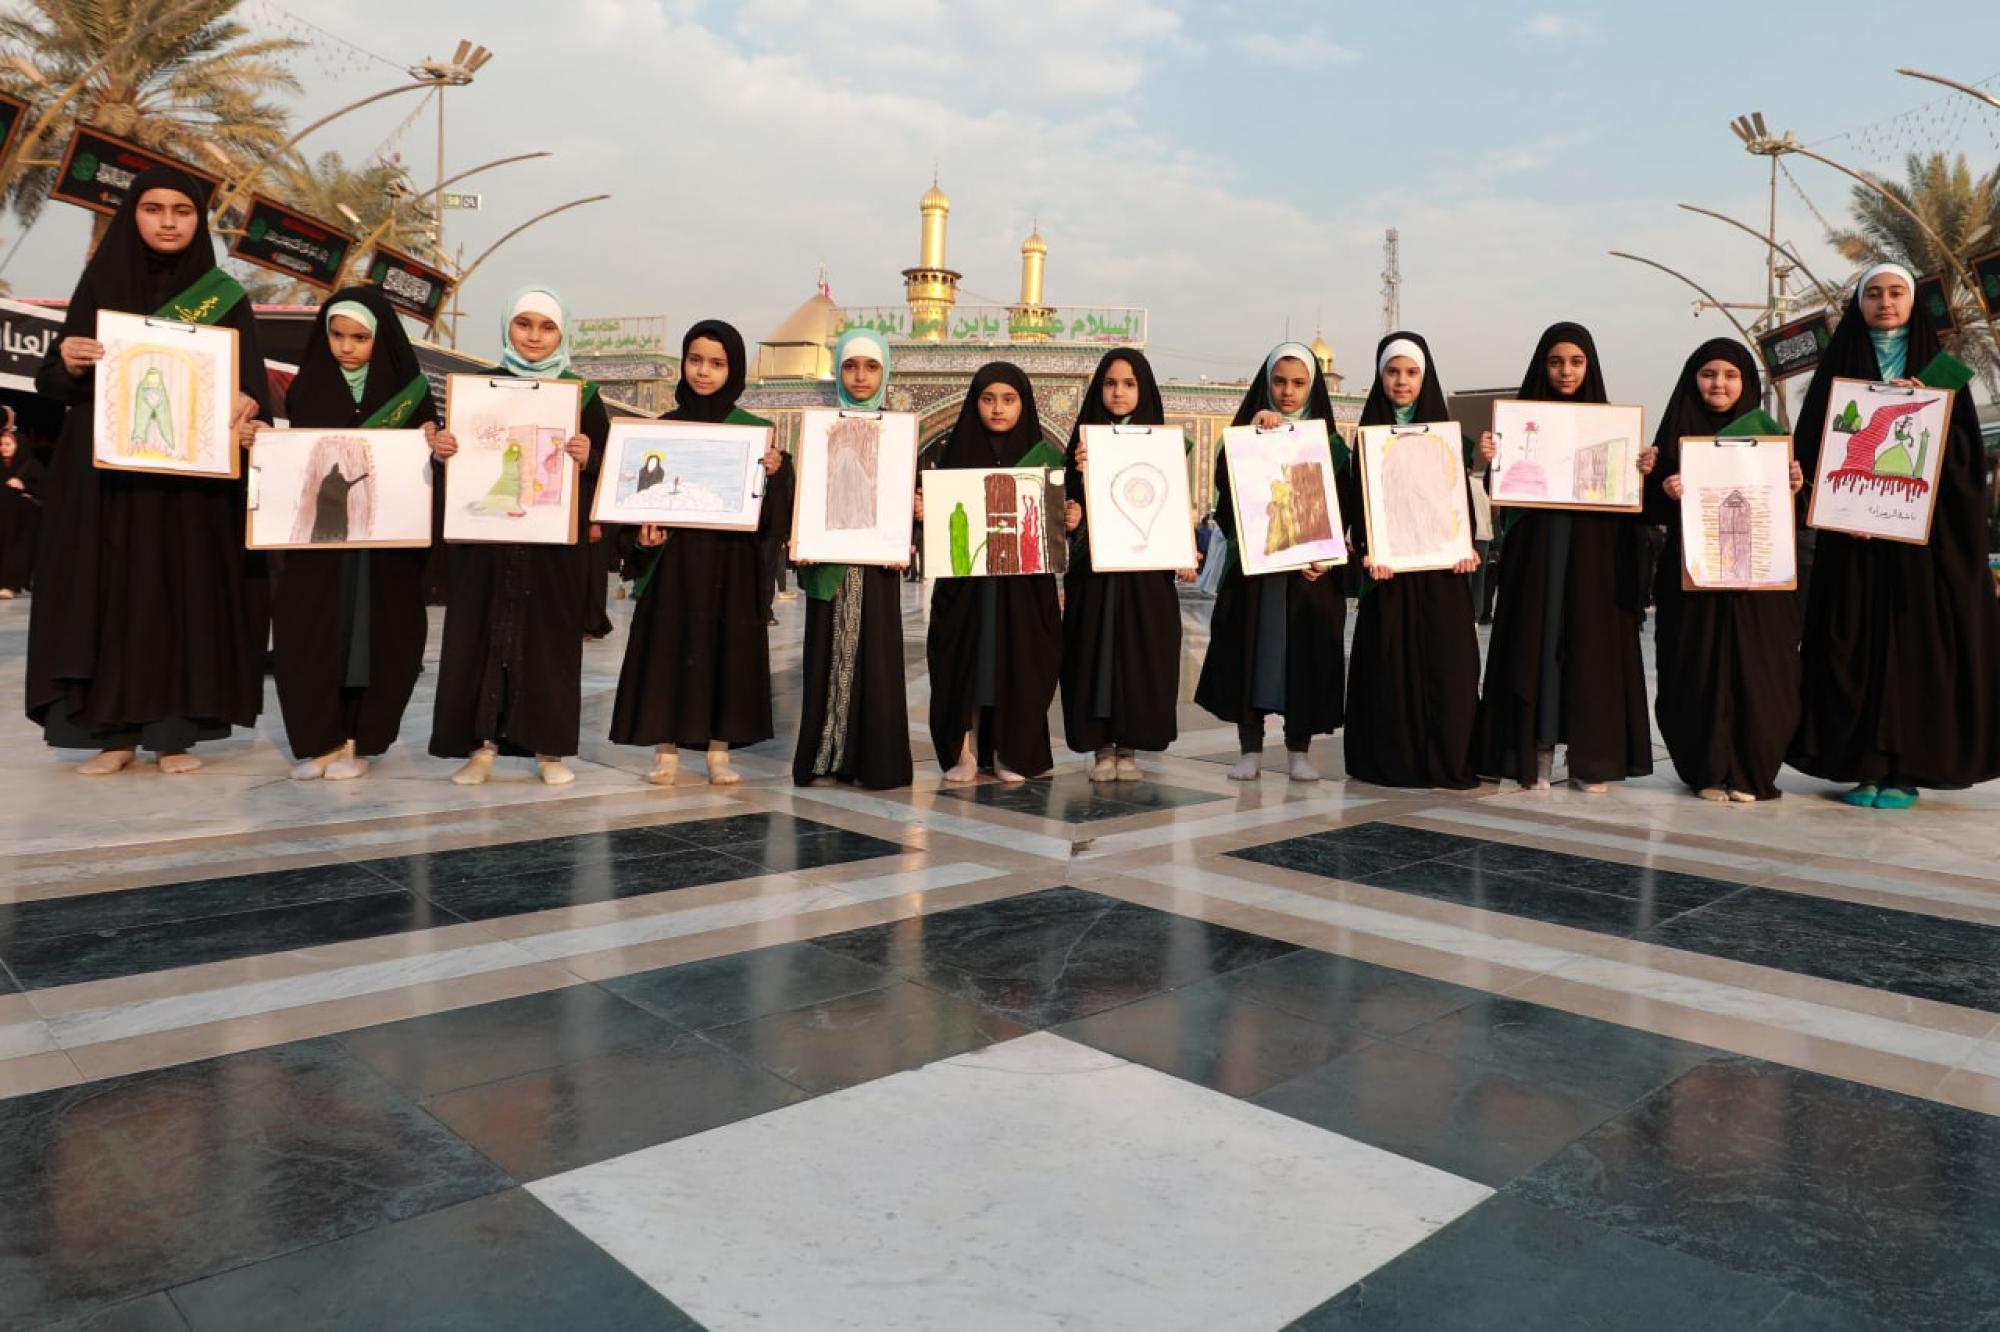 Students participate in art exhibition within festival of Fatimi season of Sorrows in Karbala